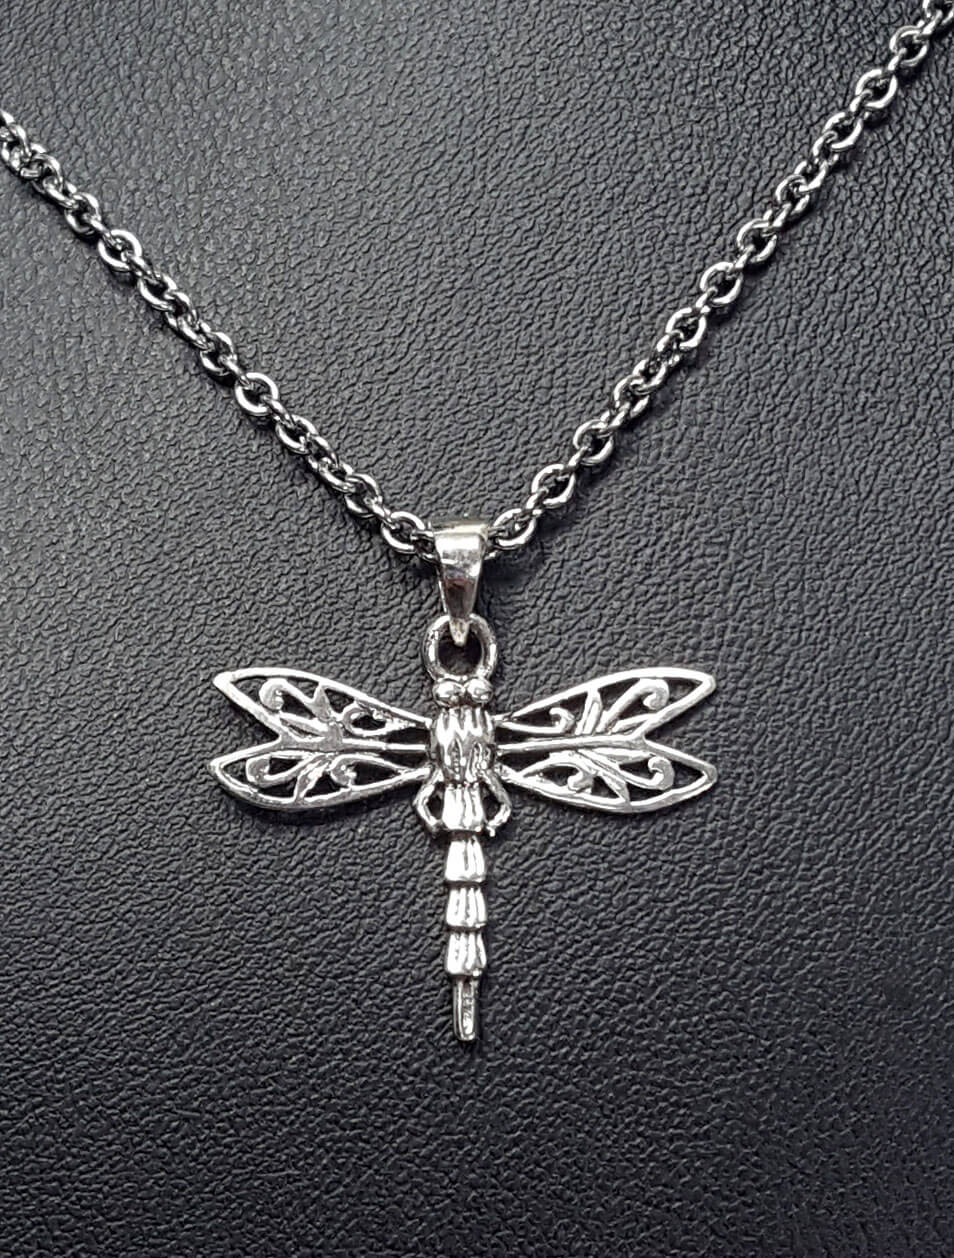 or attached to a purse Dragonfly pendants to be worn as an adornenment with infinity or long scarves Can be key chains gym or tote bag.